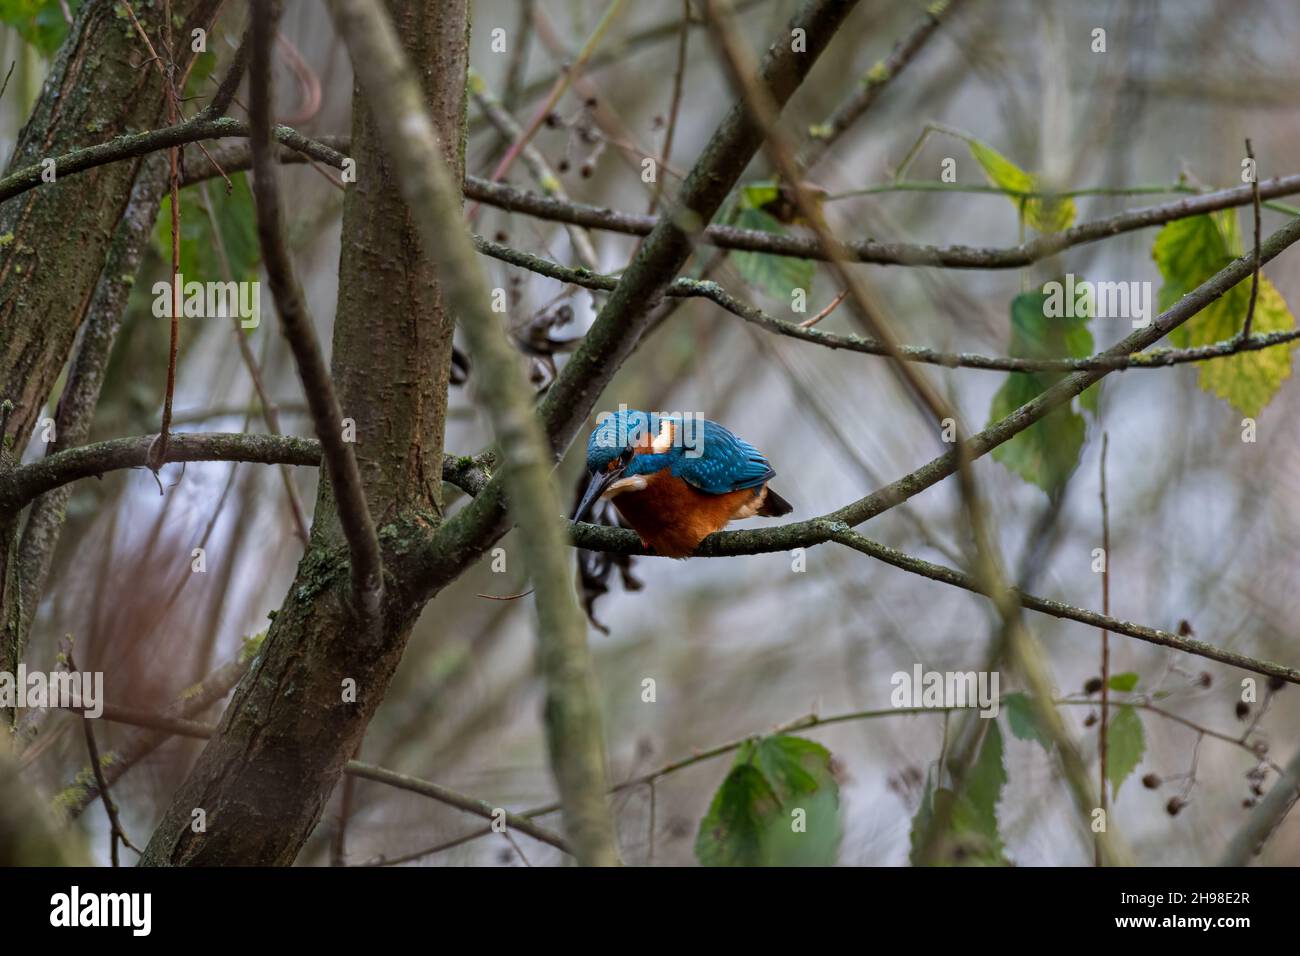 A common Kingfisher, Alcedo atthis, also known as the Eurasian kingfisher, or river Kingfisher perched on a branch by a pond. Stock Photo